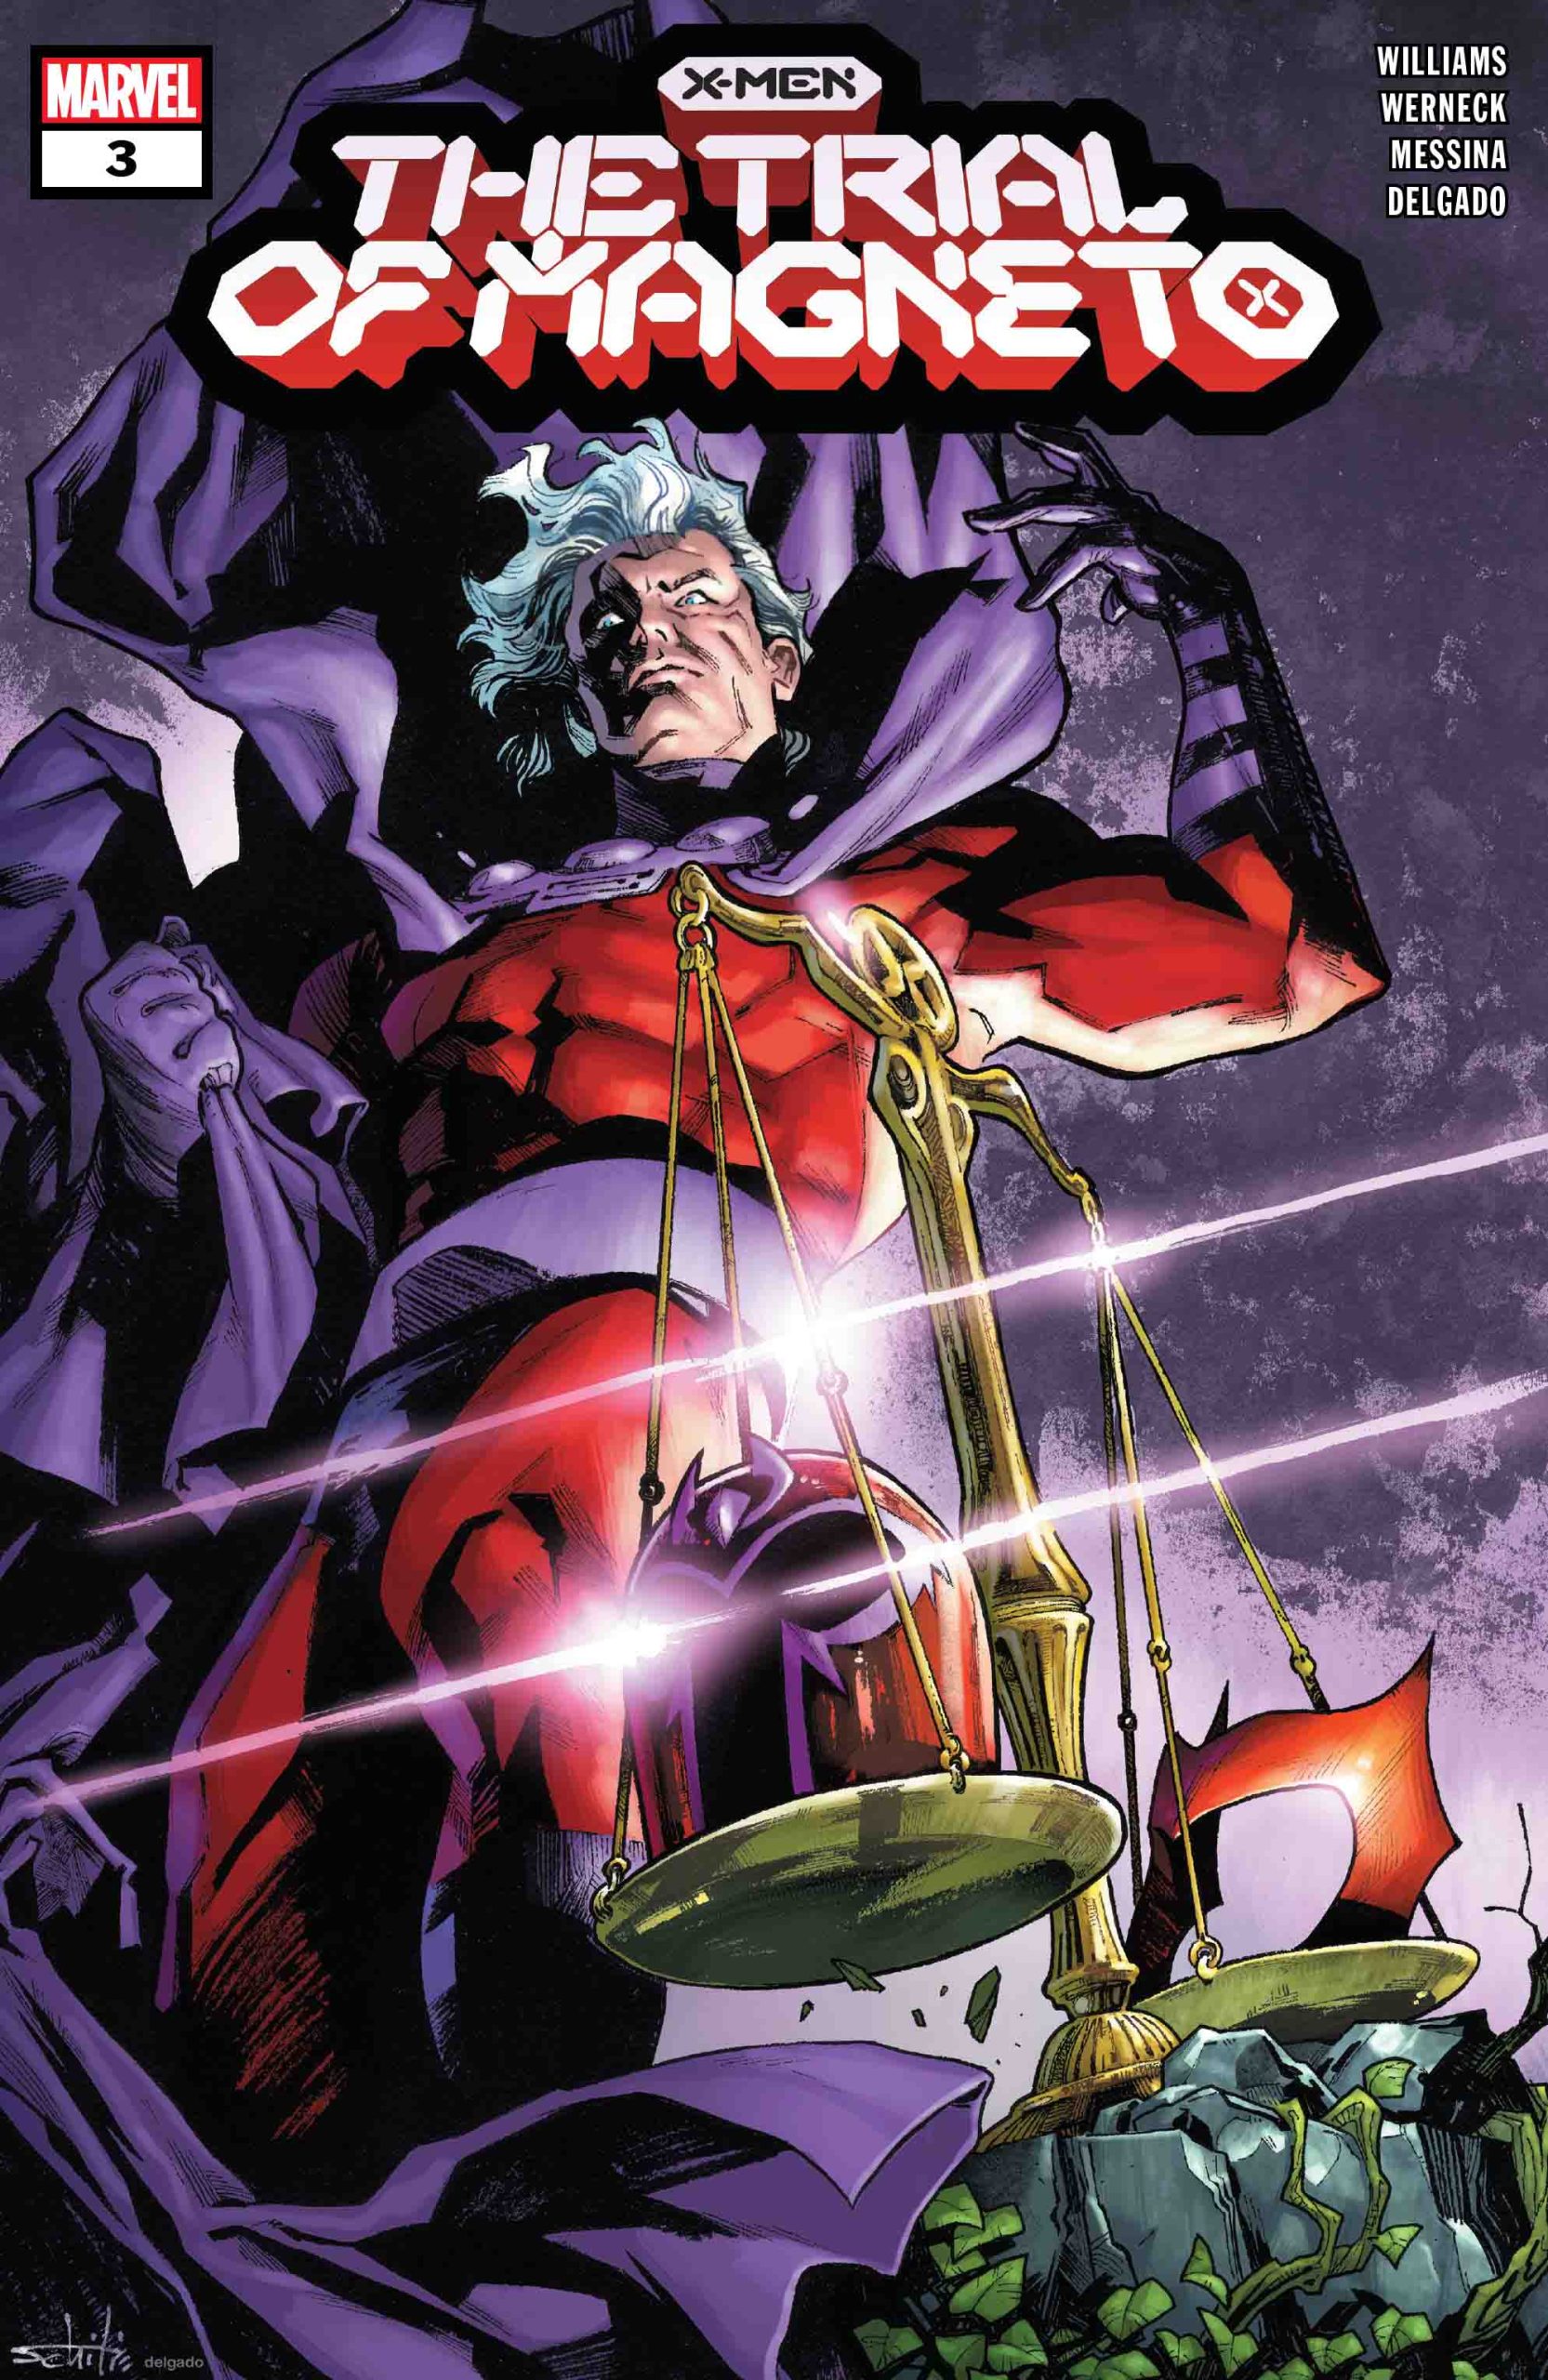 https://langgeek.net/wp-content/webpc-passthru.php?src=https://langgeek.net/wp-content/uploads/2022/03/X-Men-The-Trial-Of-Magneto-2021-03-of-05-000-scaled.jpg&nocache=1